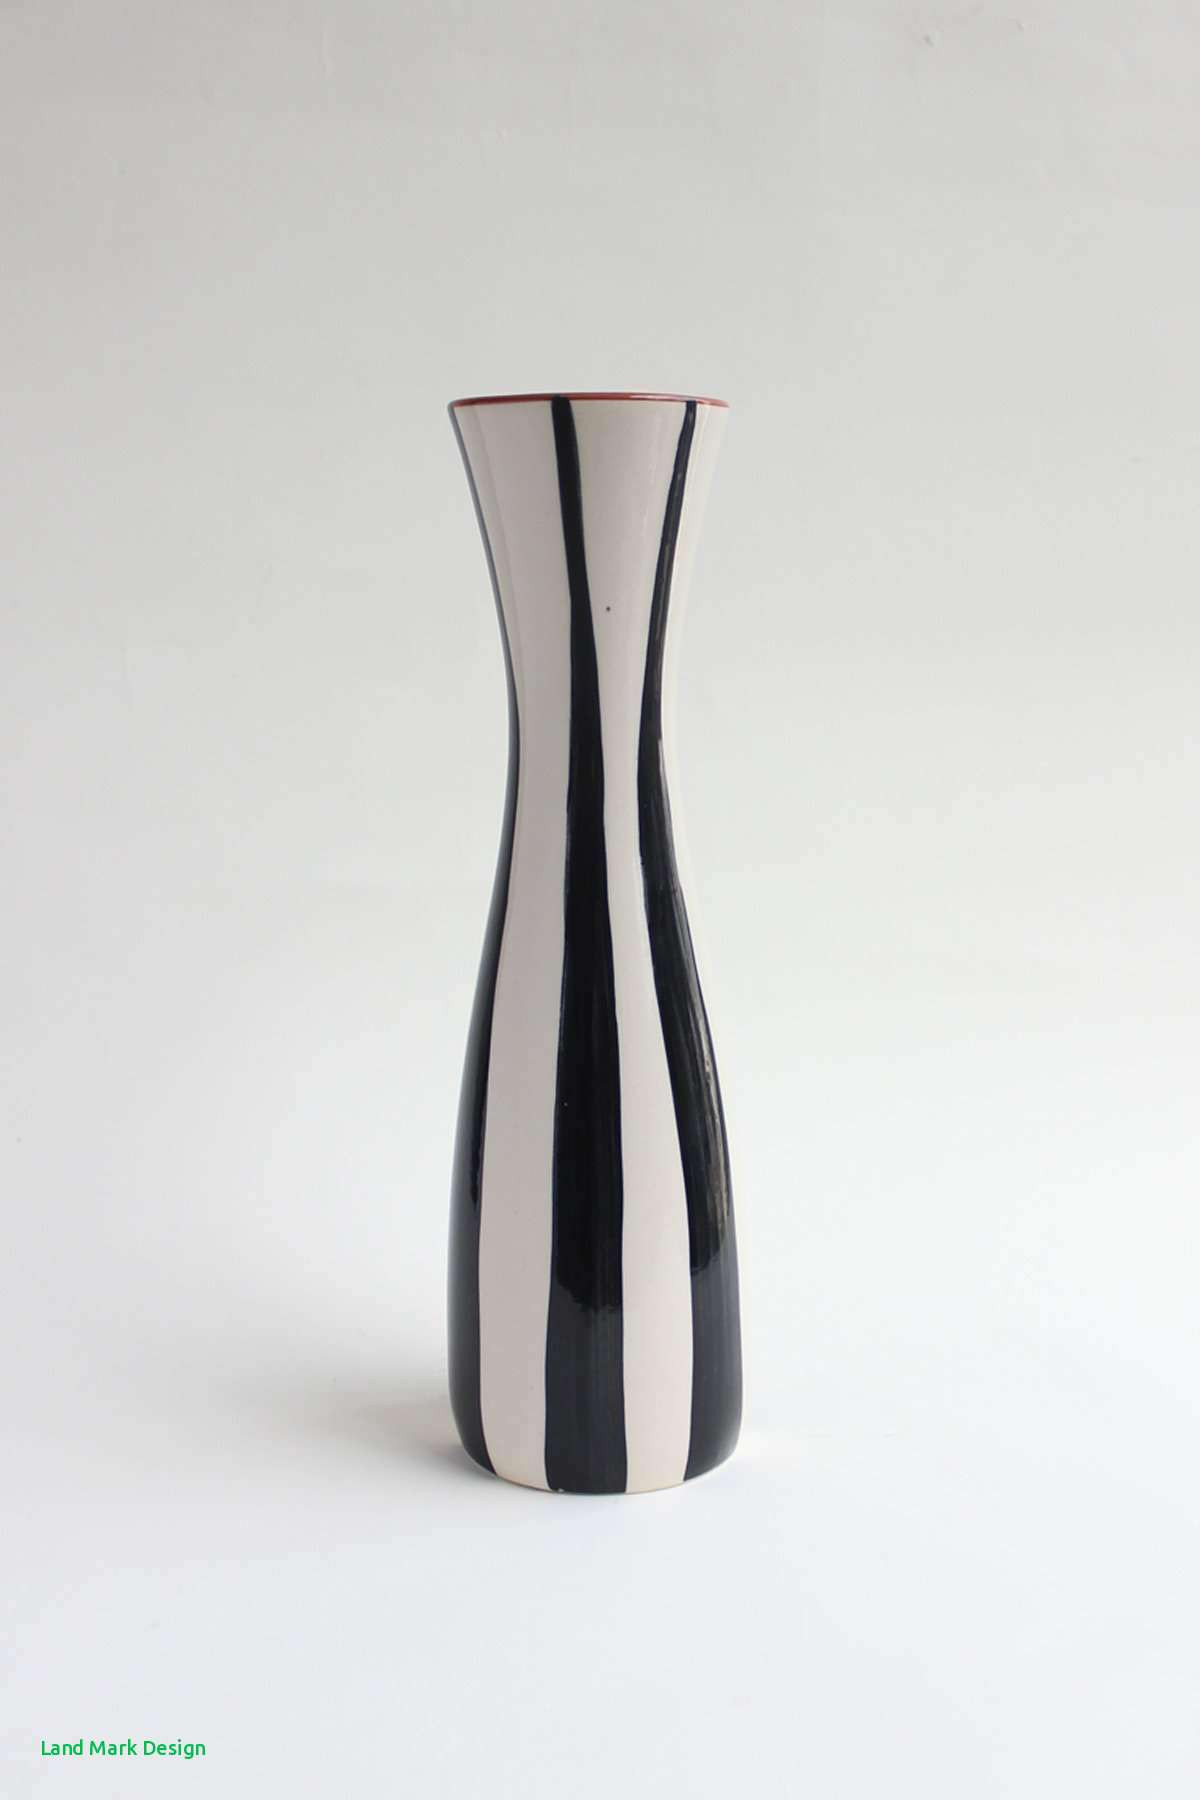 14 Unique Ming Vases Designs 2022 free download ming vases designs of large white vases collection what color goes with black and white regarding large white vases collection what color goes with black and white